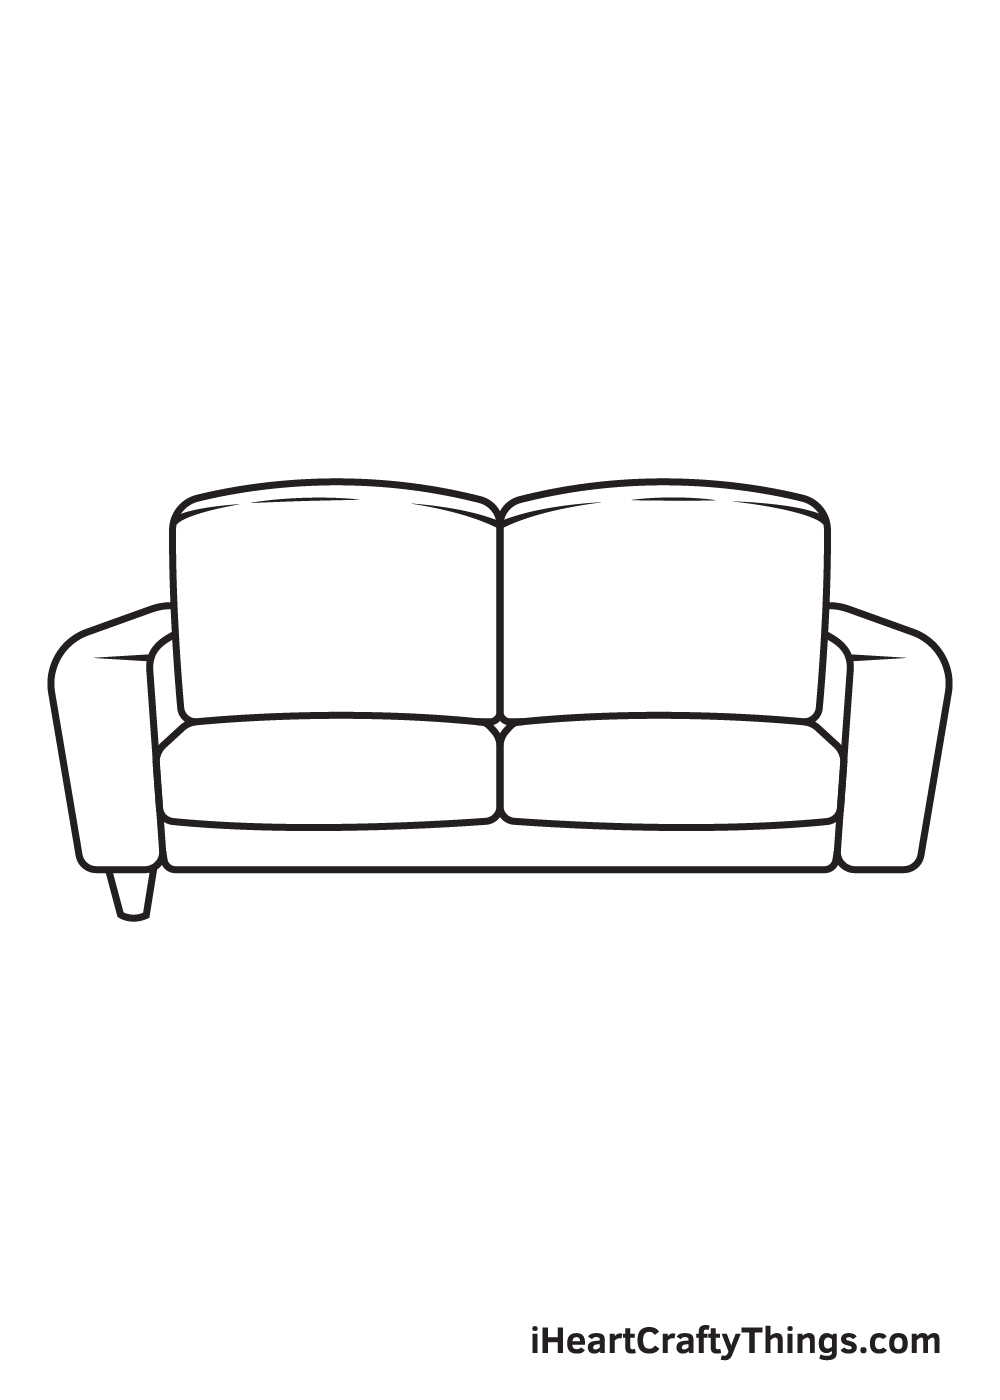 Drawing a chair - Step 8